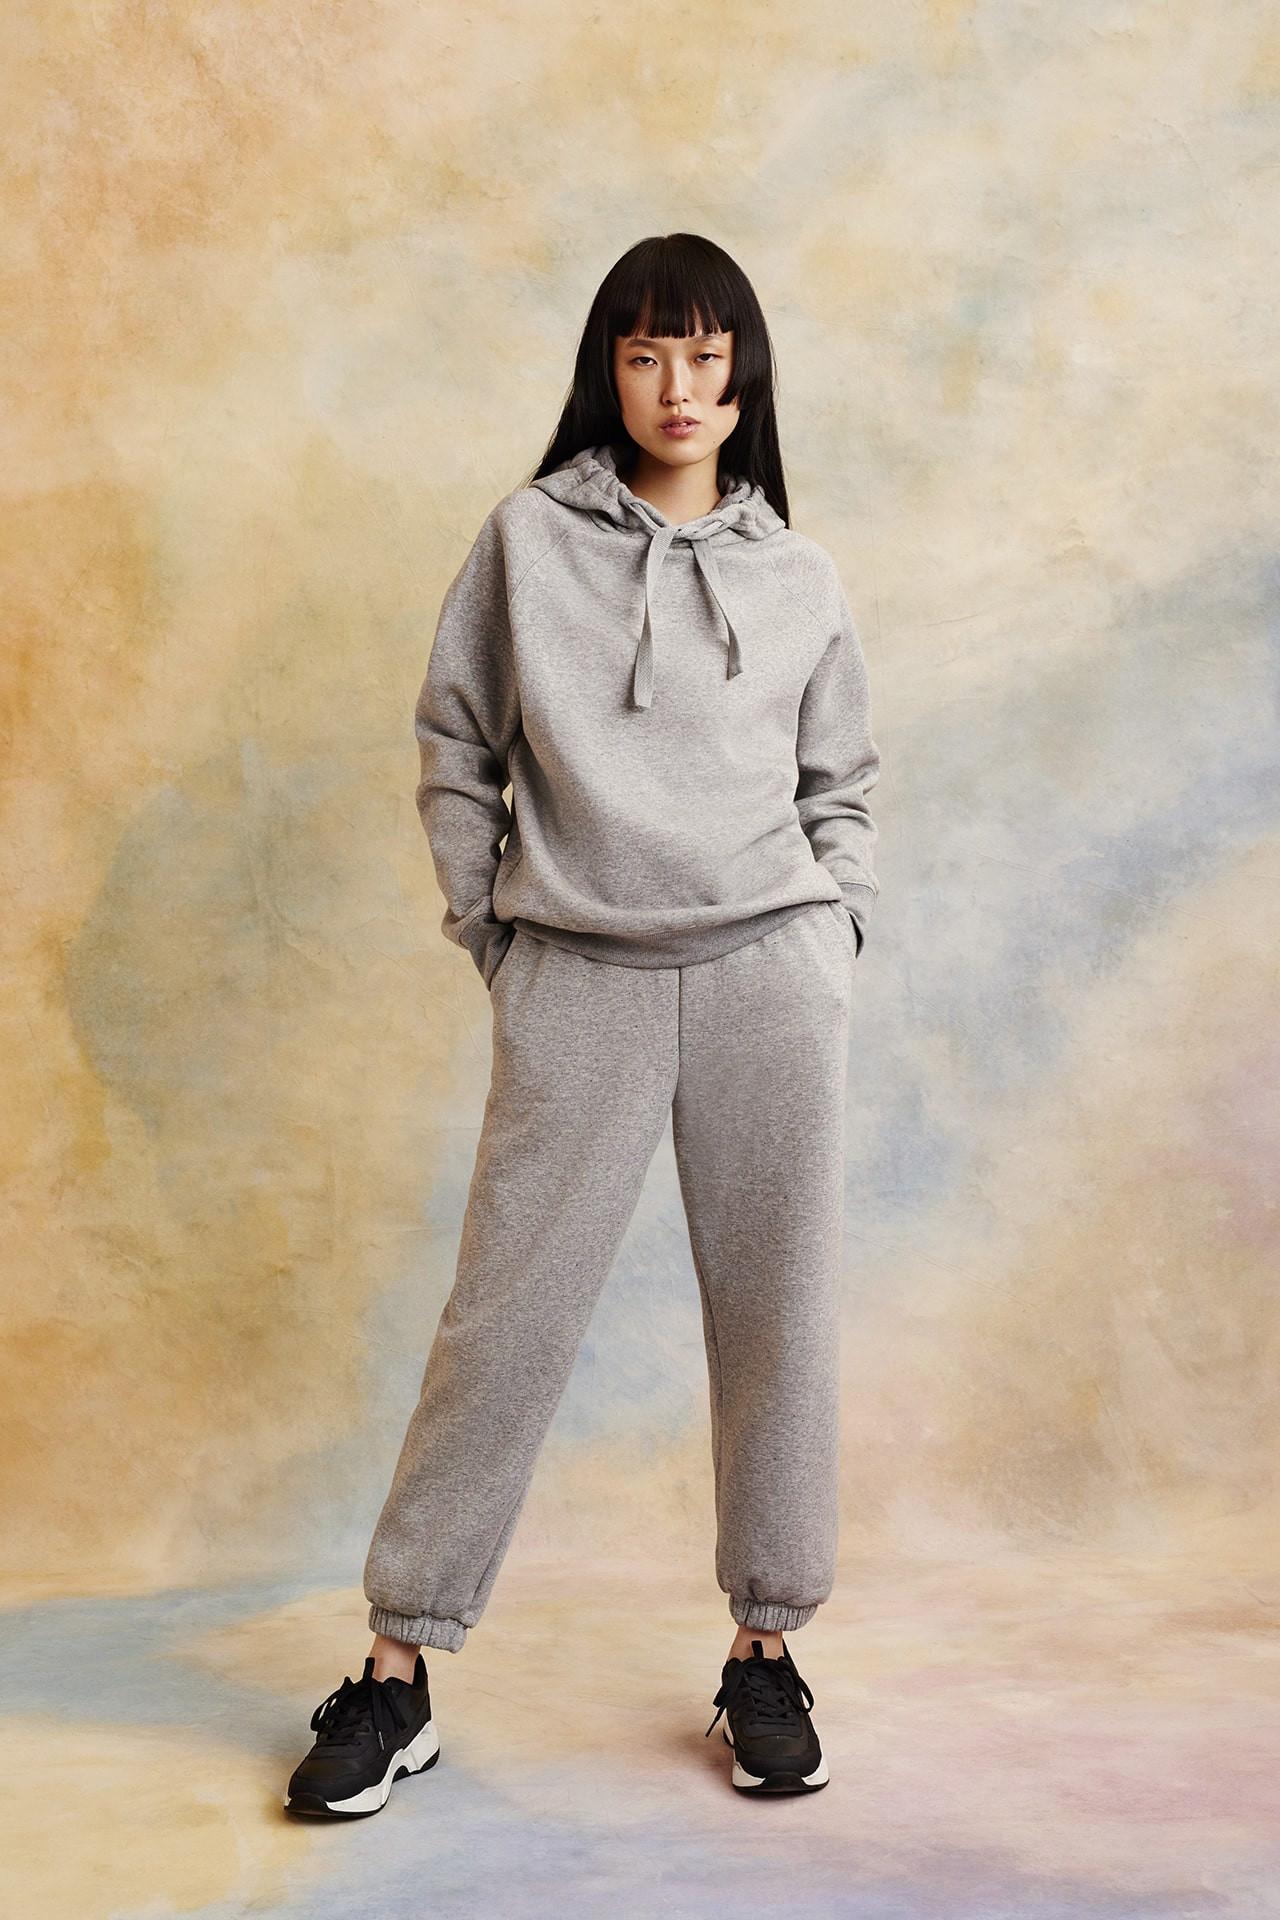 Primark launches new sustainable women’s leisurewear collection with recycled cotton